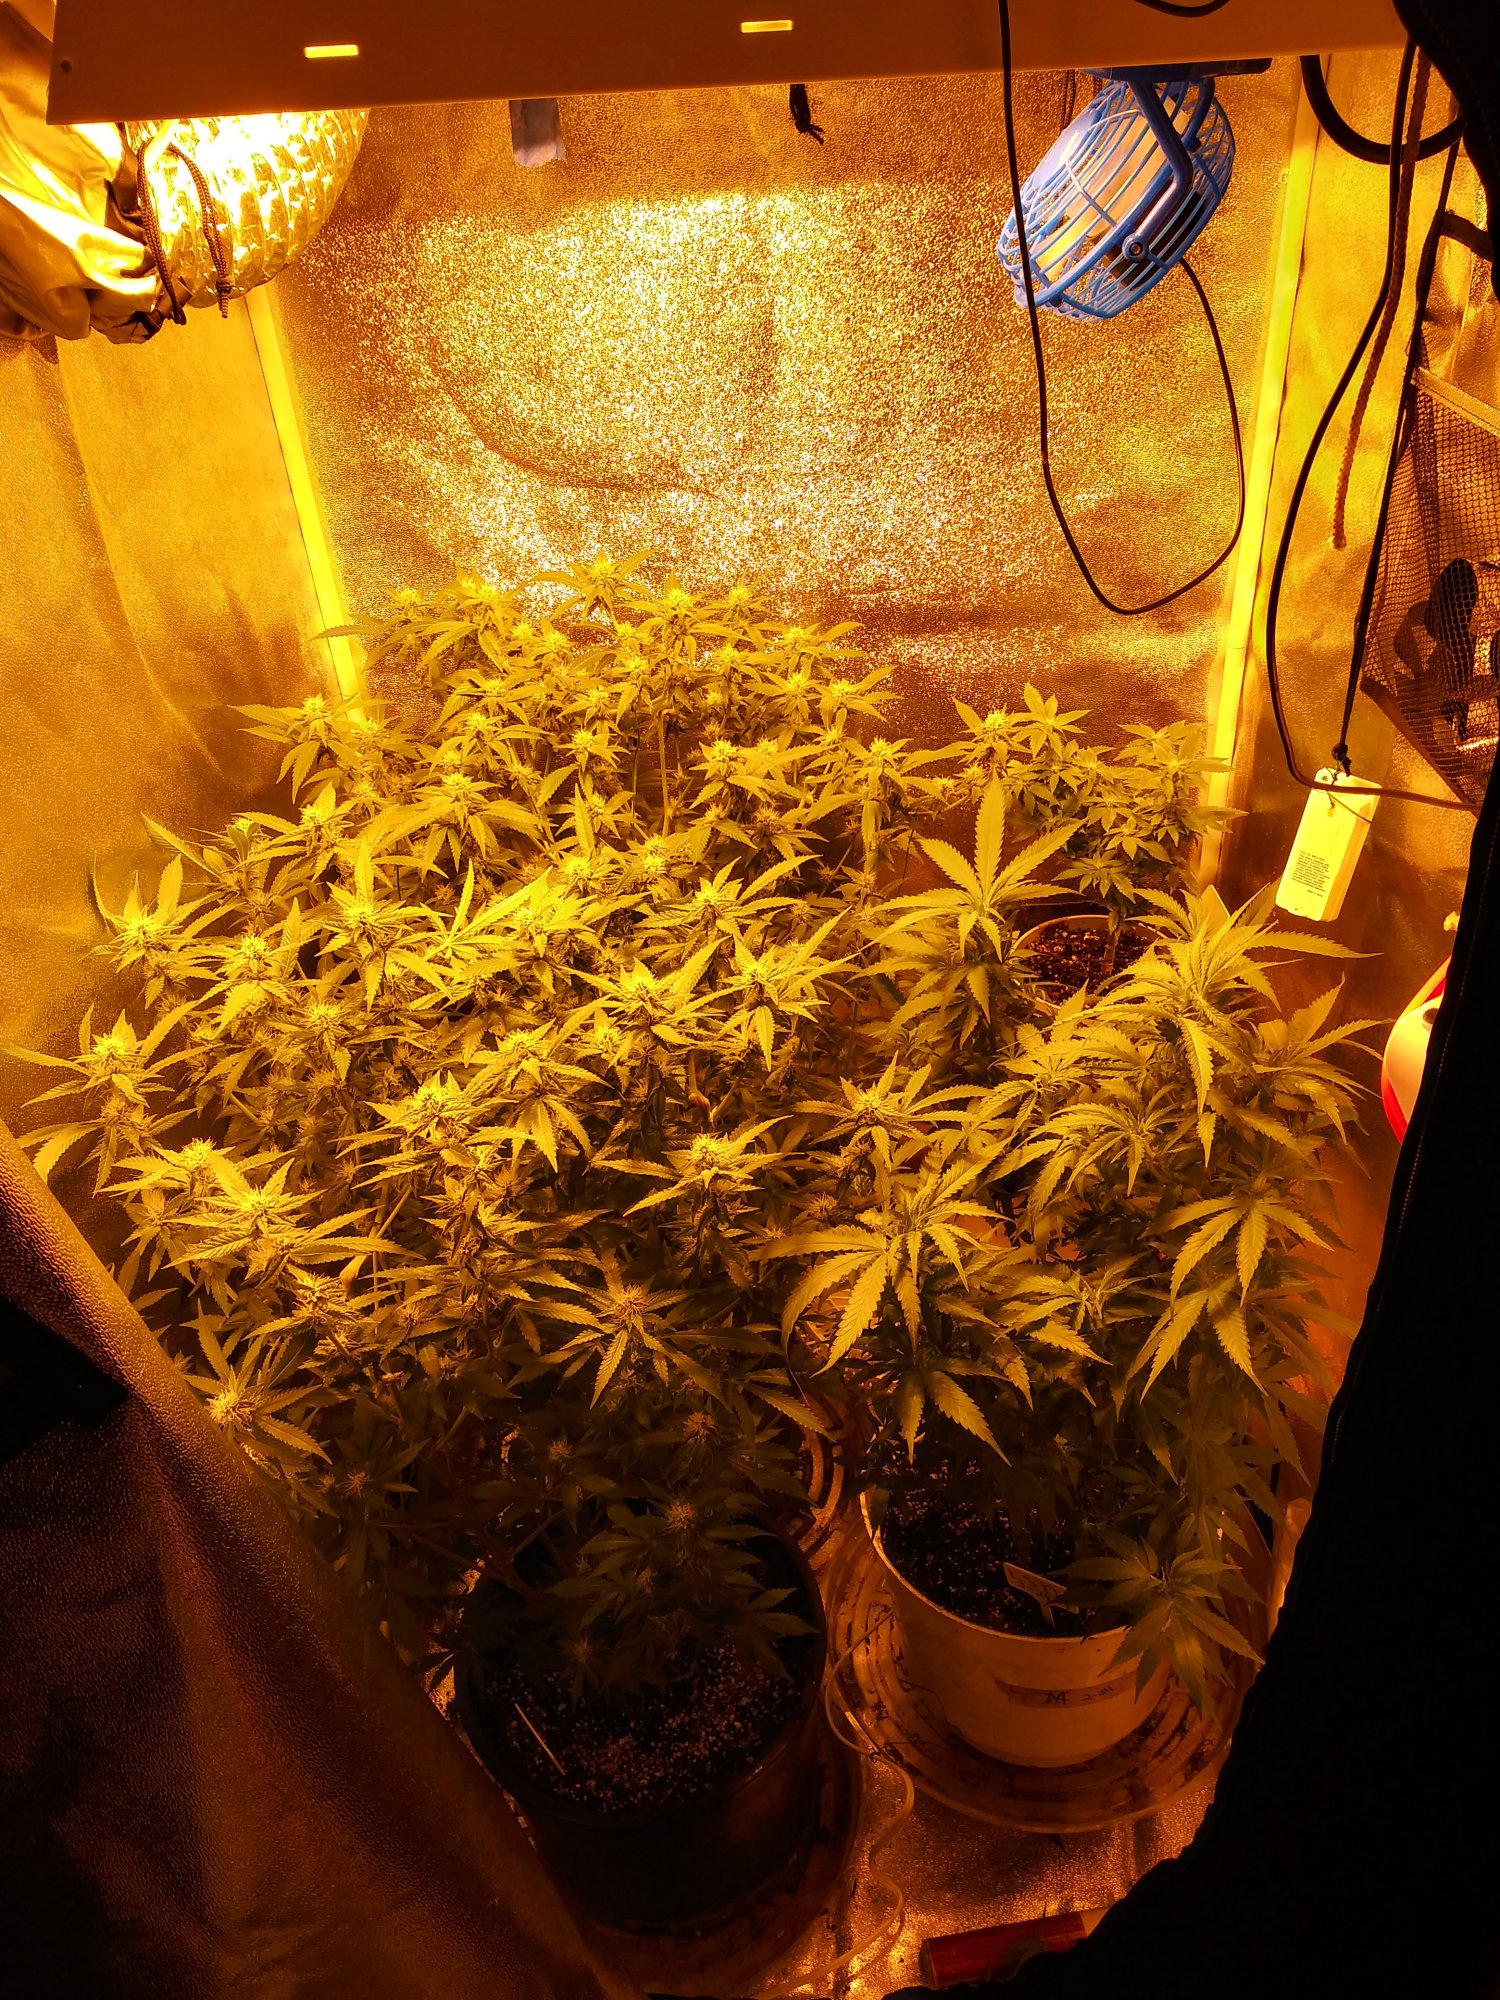 Flower tent getting too hot